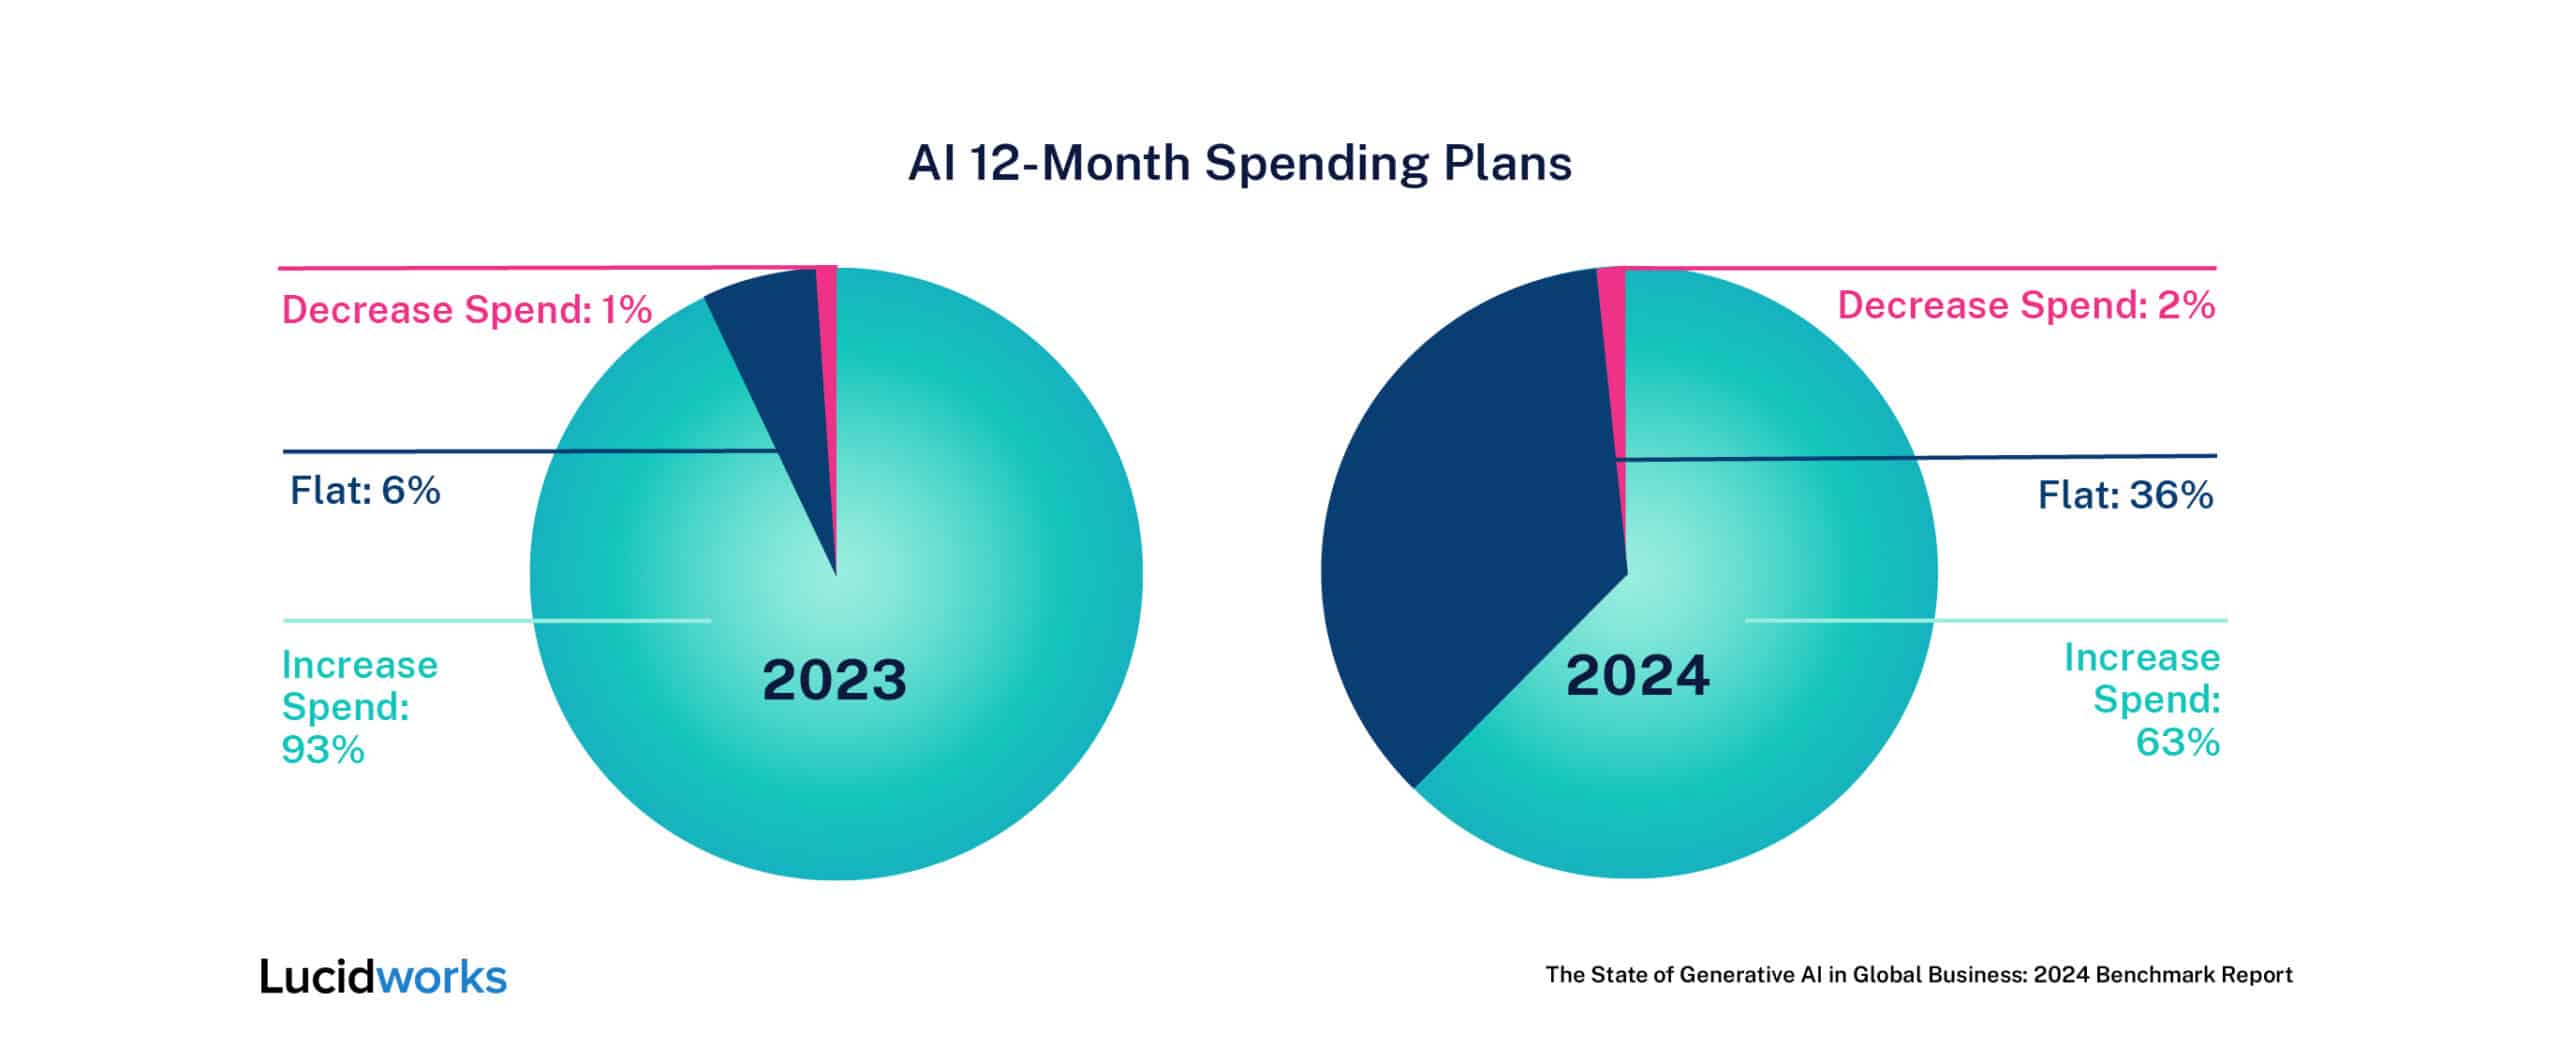 Two pie charts comparing AI spending plans in 2023 and 2024. In 2023, 93% of companies planned to increase spending, while in 2024, only 63% planned to increase spending.